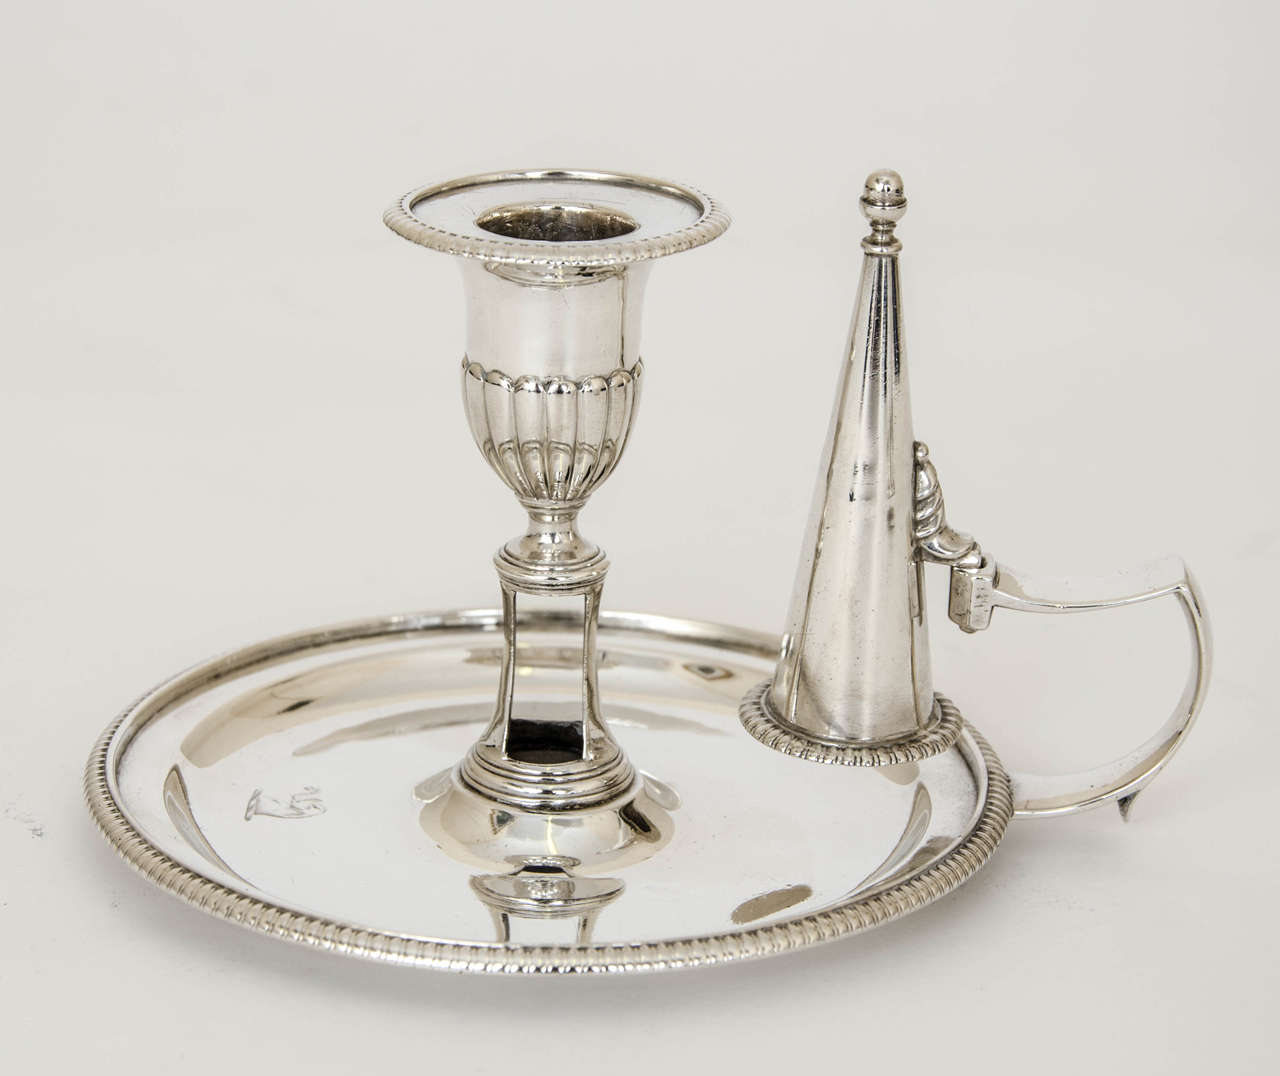 English Pair of George III Antique Sterling Silver by Paul Storr in 1799 For Sale